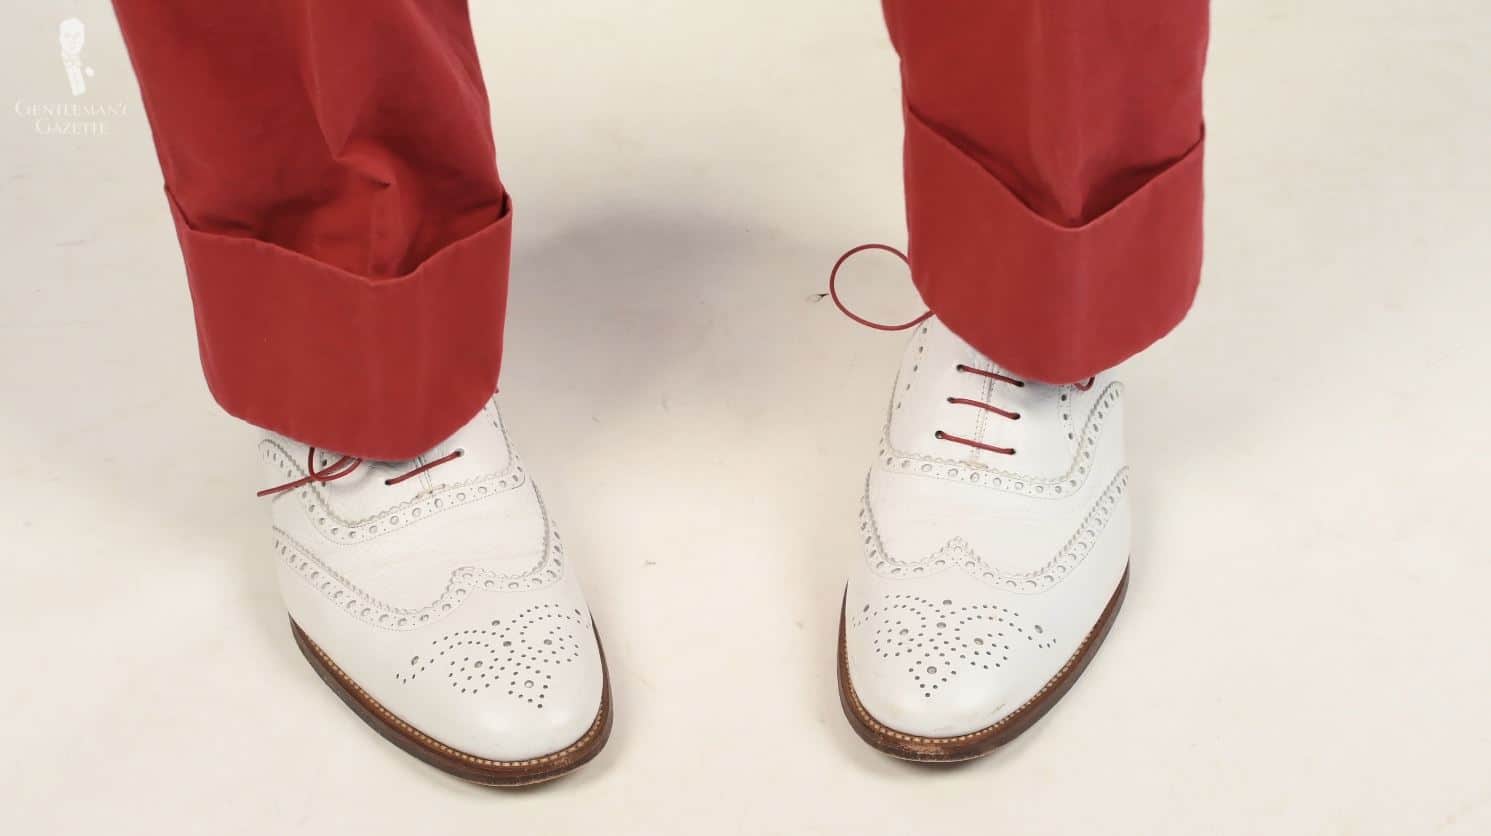 White buck worn with red trousers and colored shoelaces